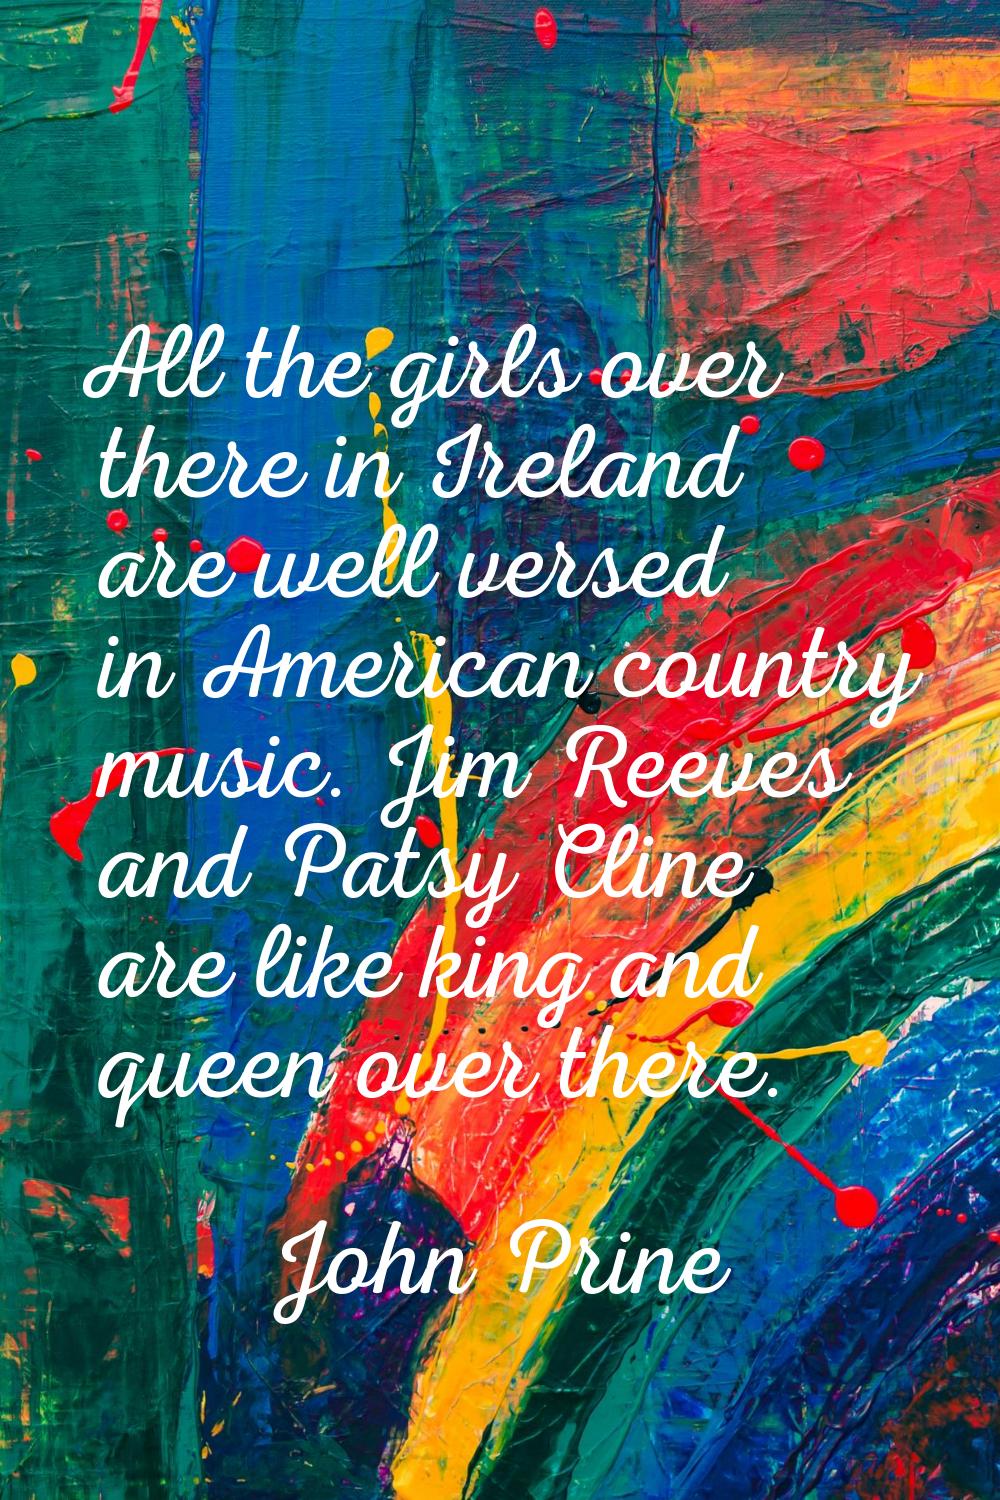 All the girls over there in Ireland are well versed in American country music. Jim Reeves and Patsy